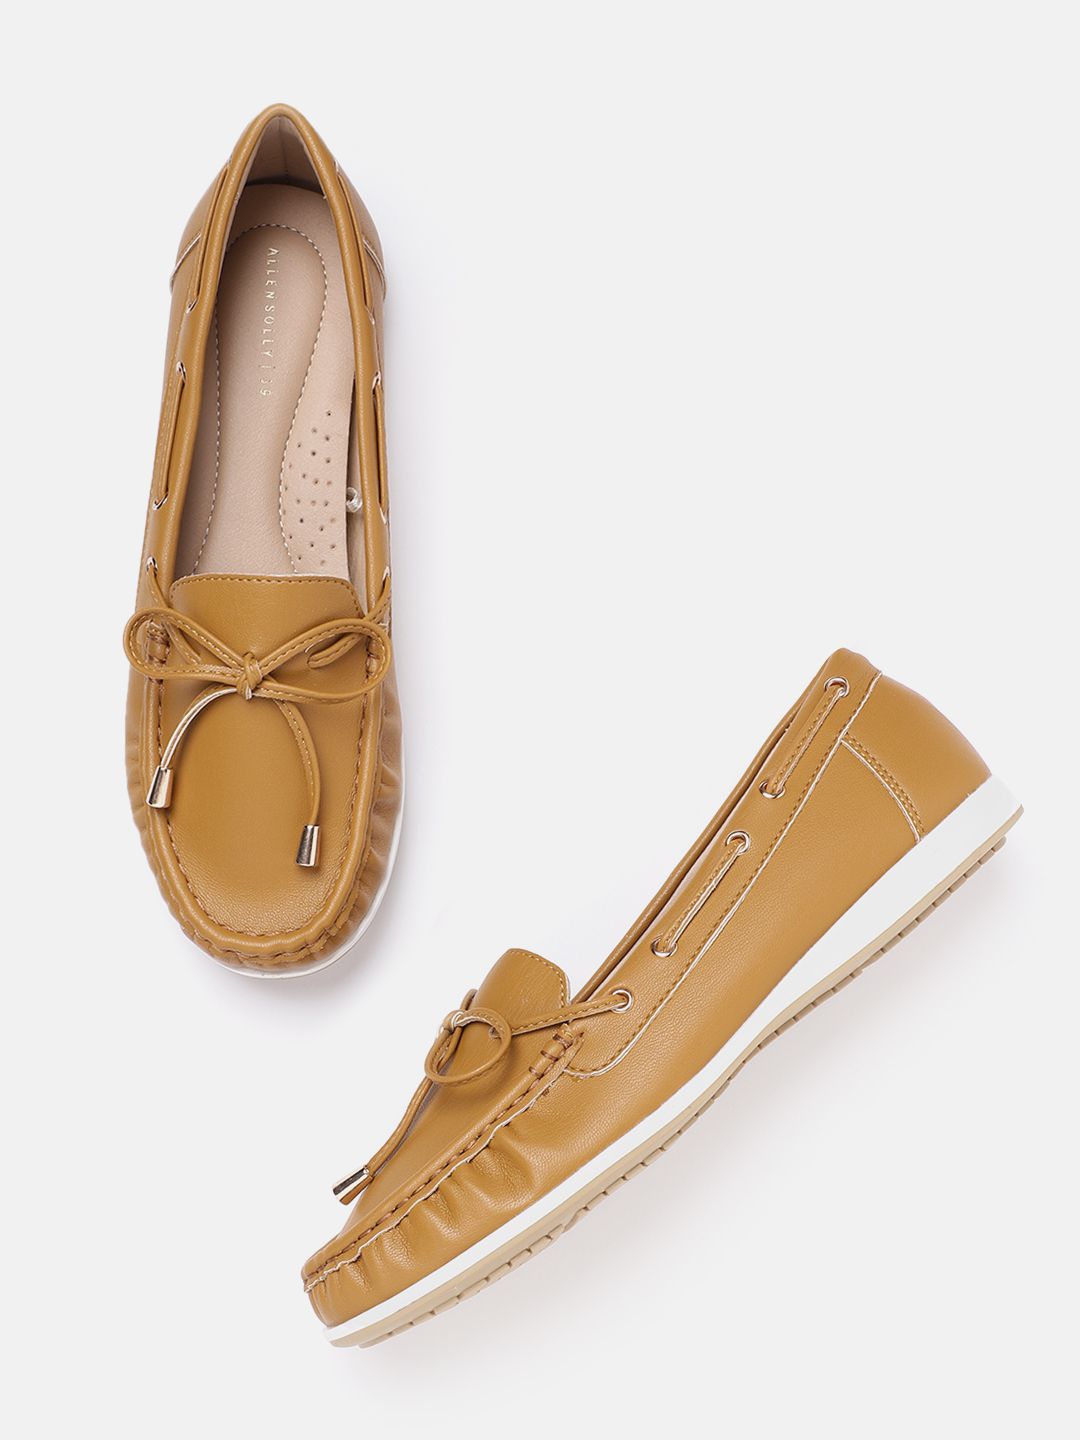 Allen Solly Women Mustard Yellow Solid Boat Shoes with Bow Detail Price in India